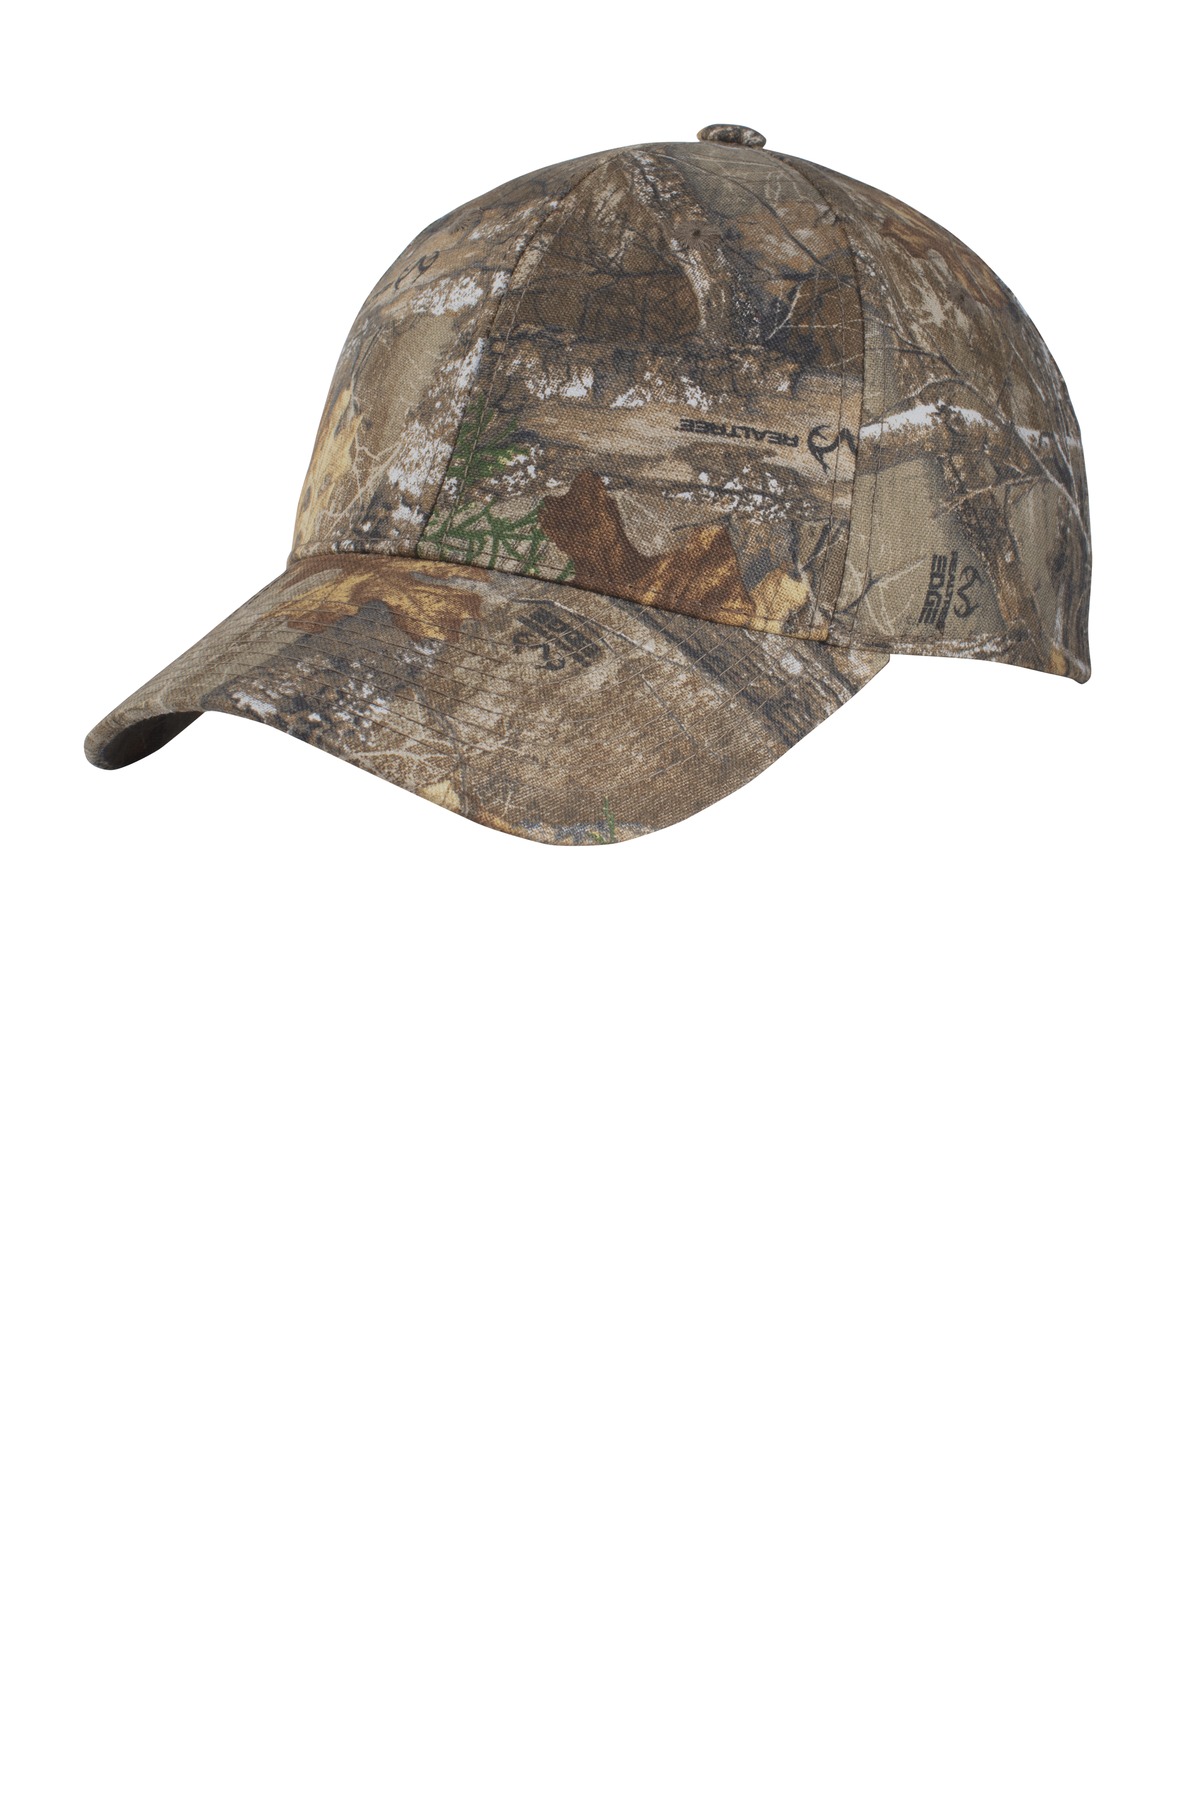 Selected Color is Realtree Edge